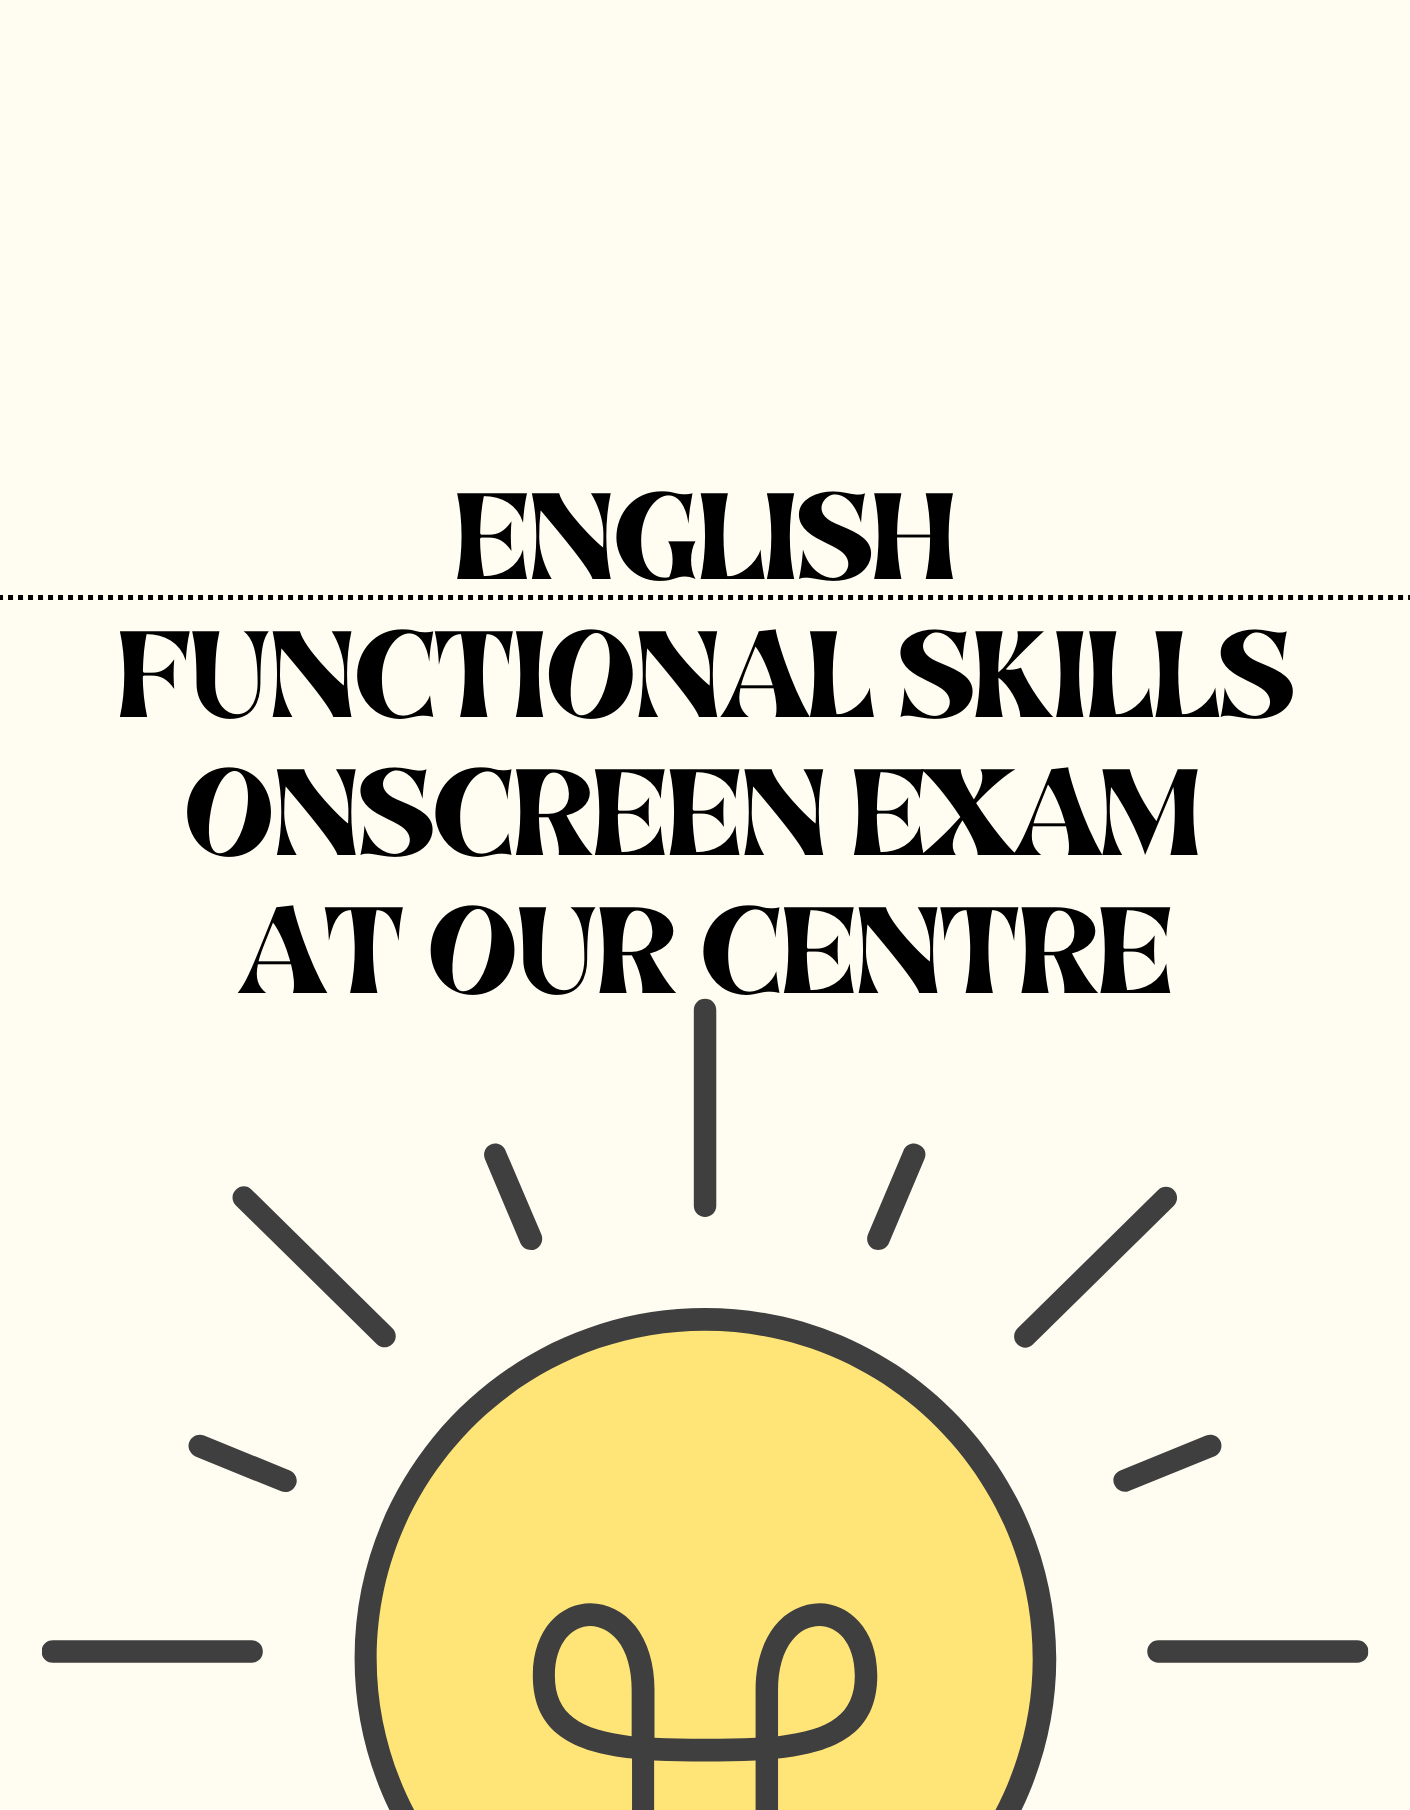 English Functional Skills Onscreen Exam - At Our Centre. - Exam Centre Birmingham Limited